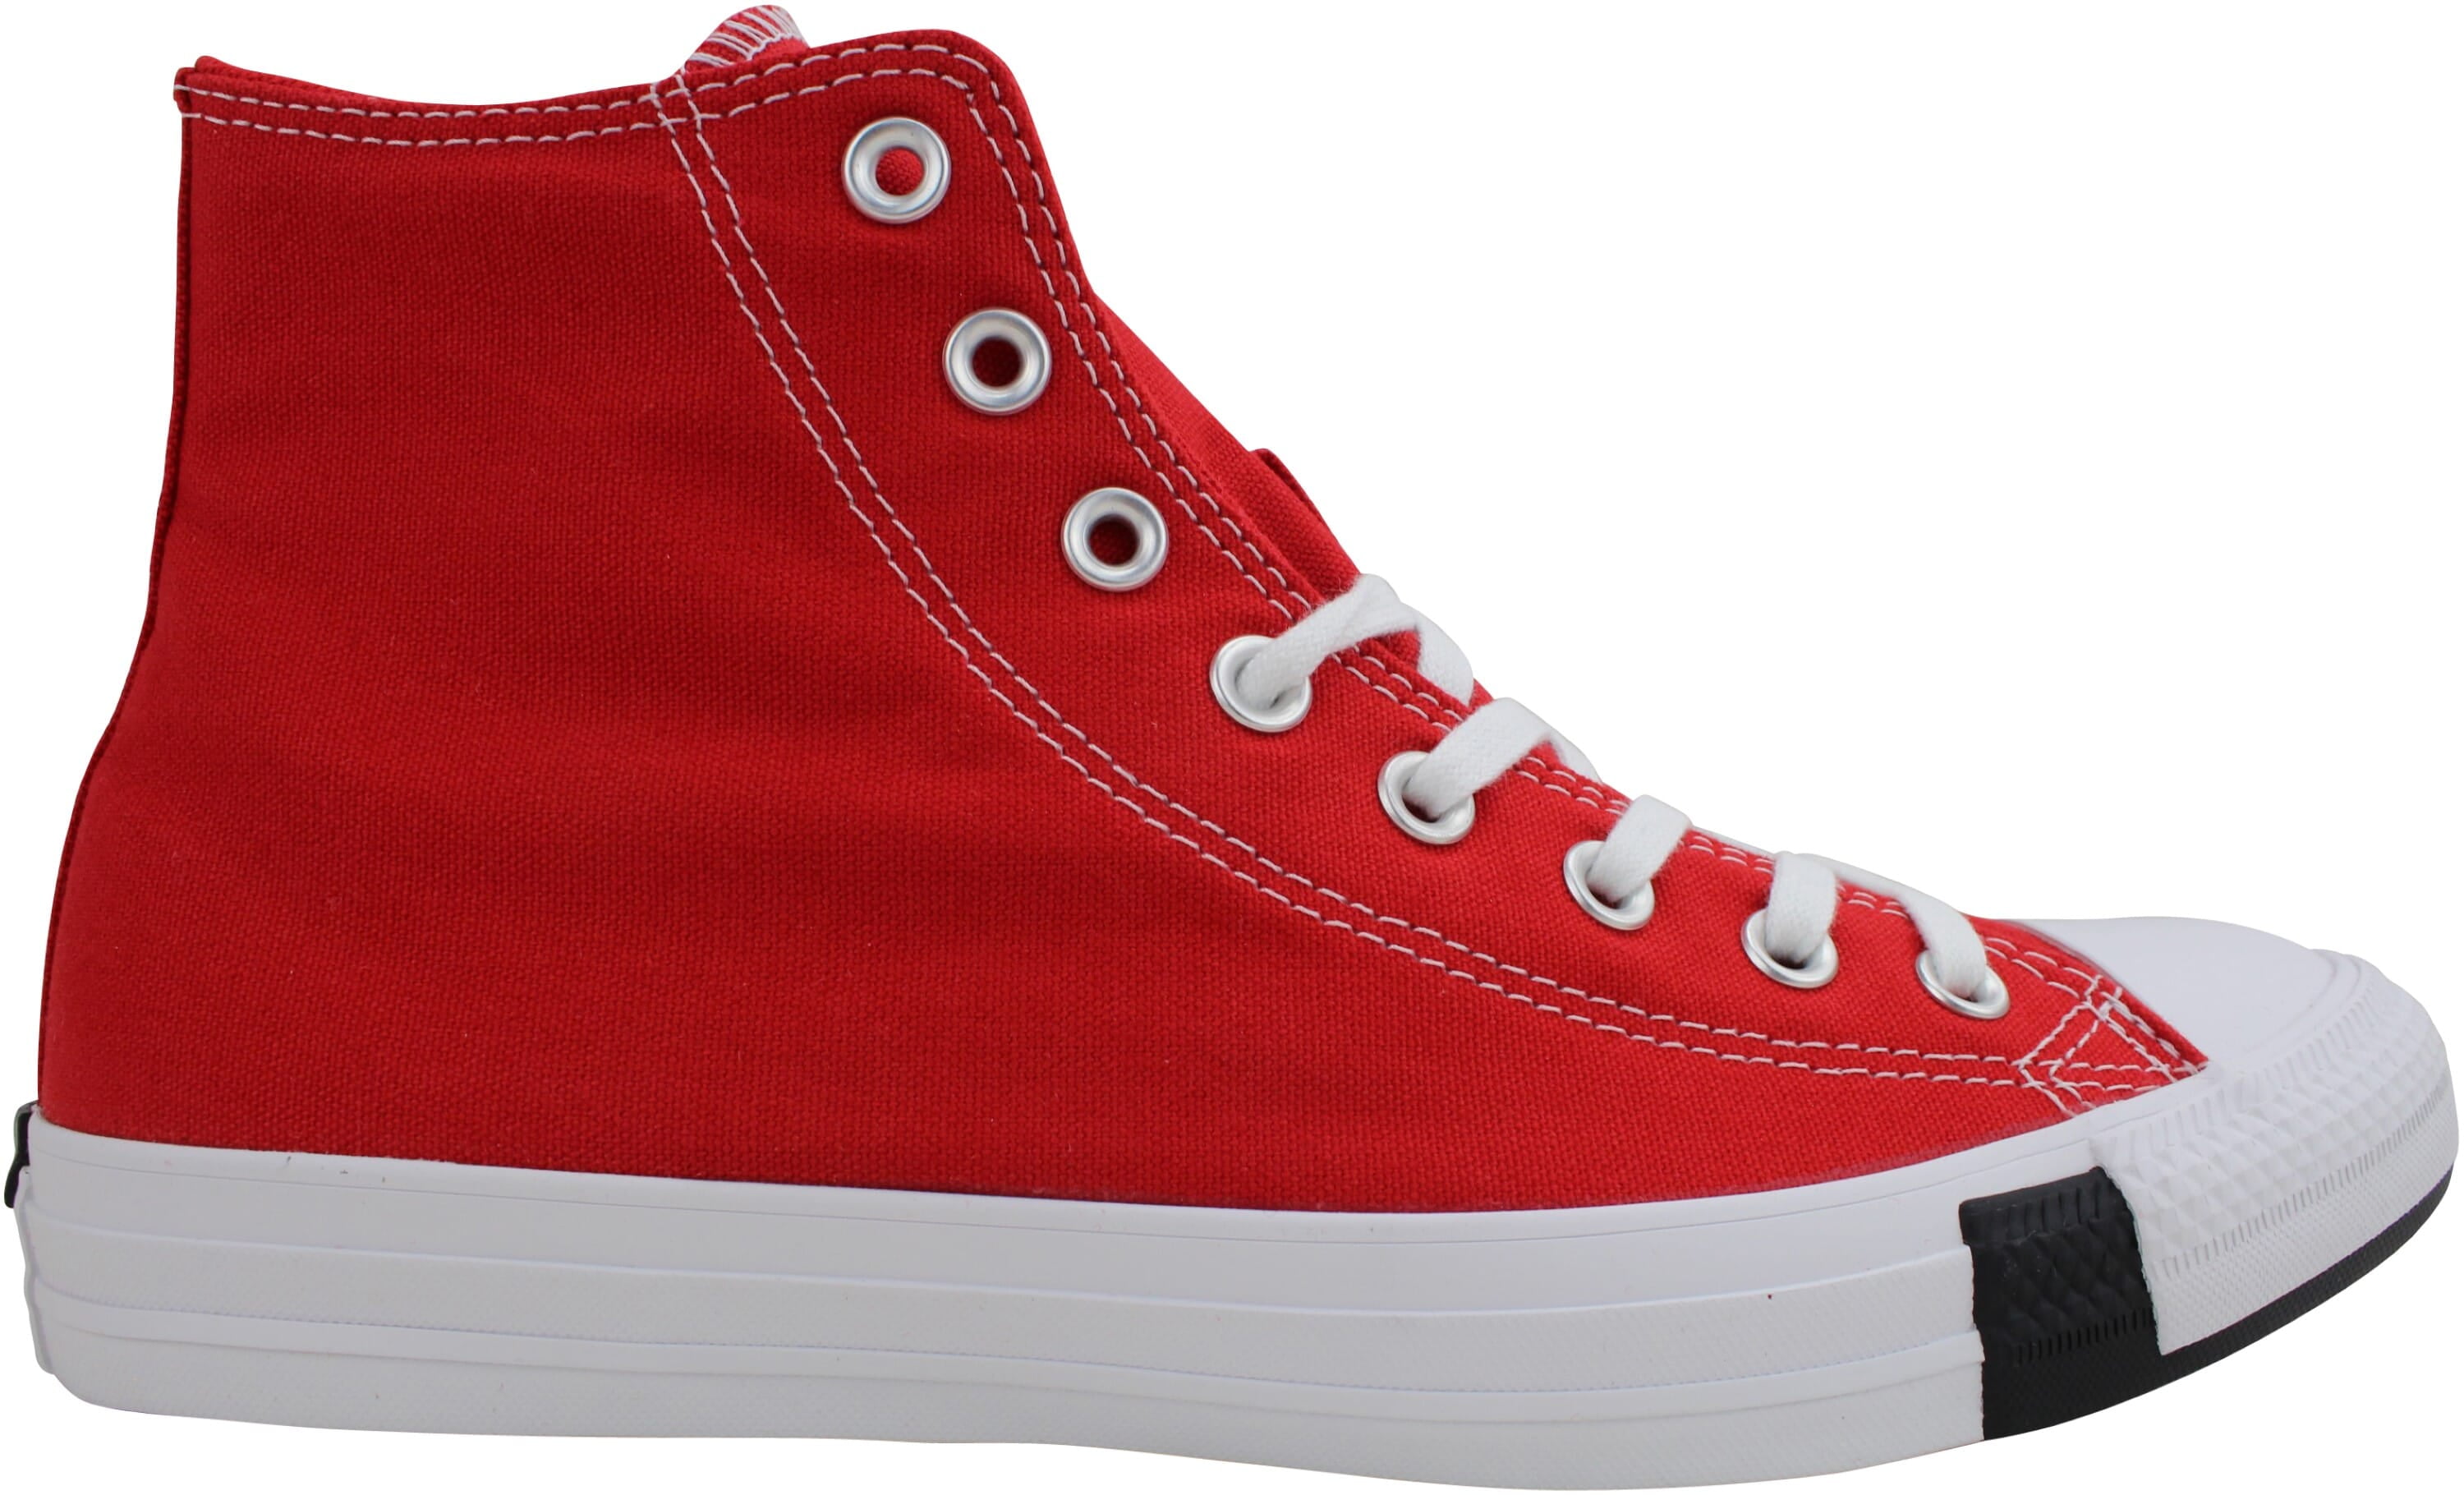 converse all star red black